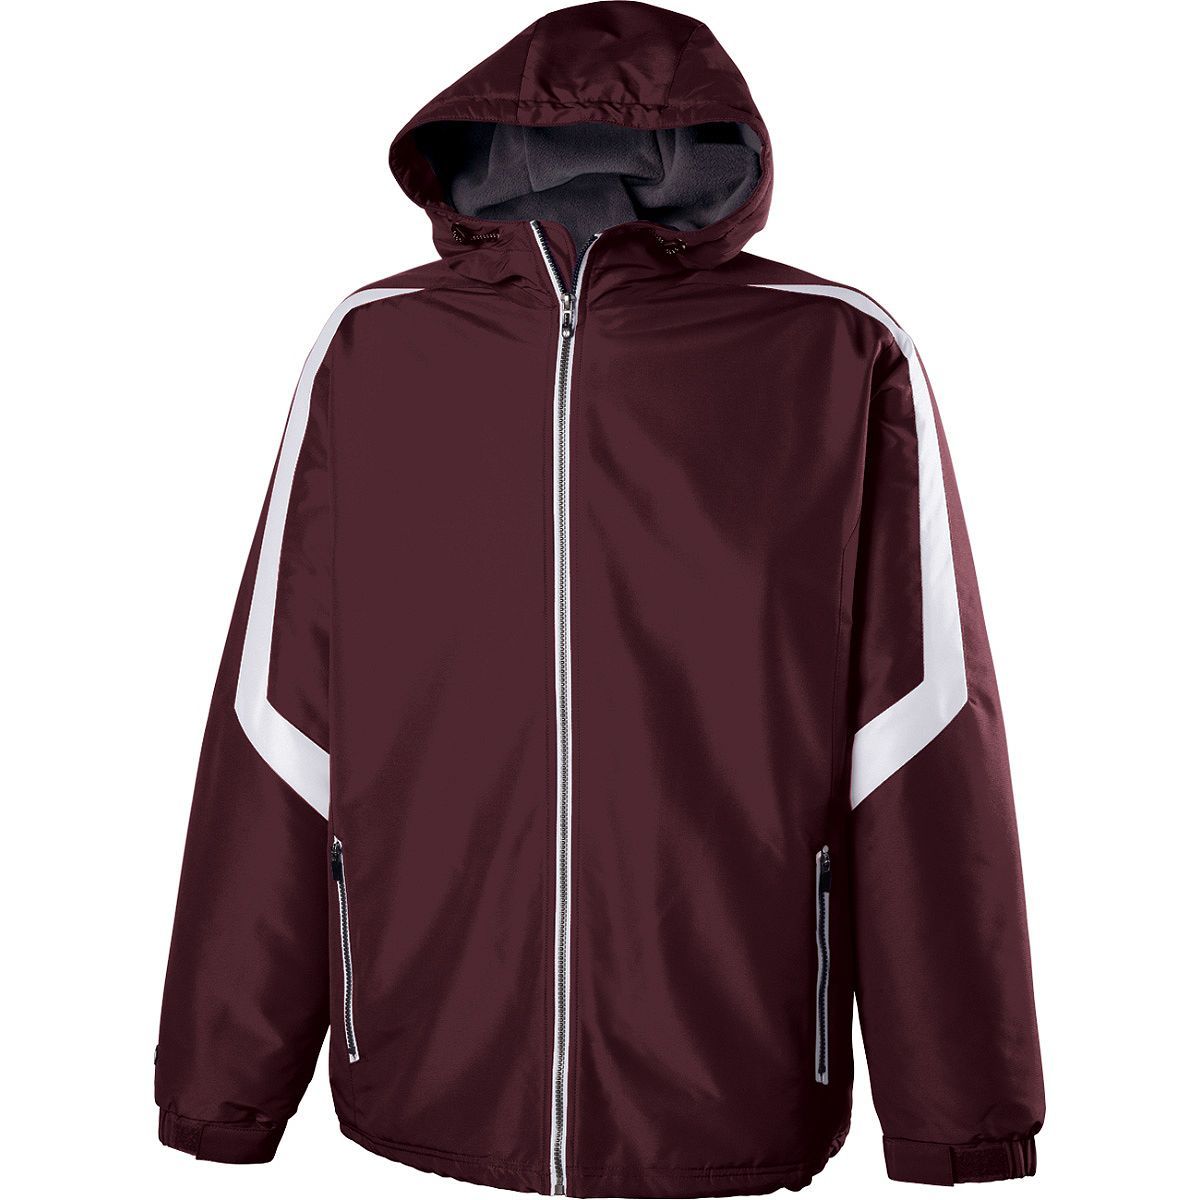 Holloway Sportswear L Charger Jacket Maroon/White 229059 - image 4 of 4